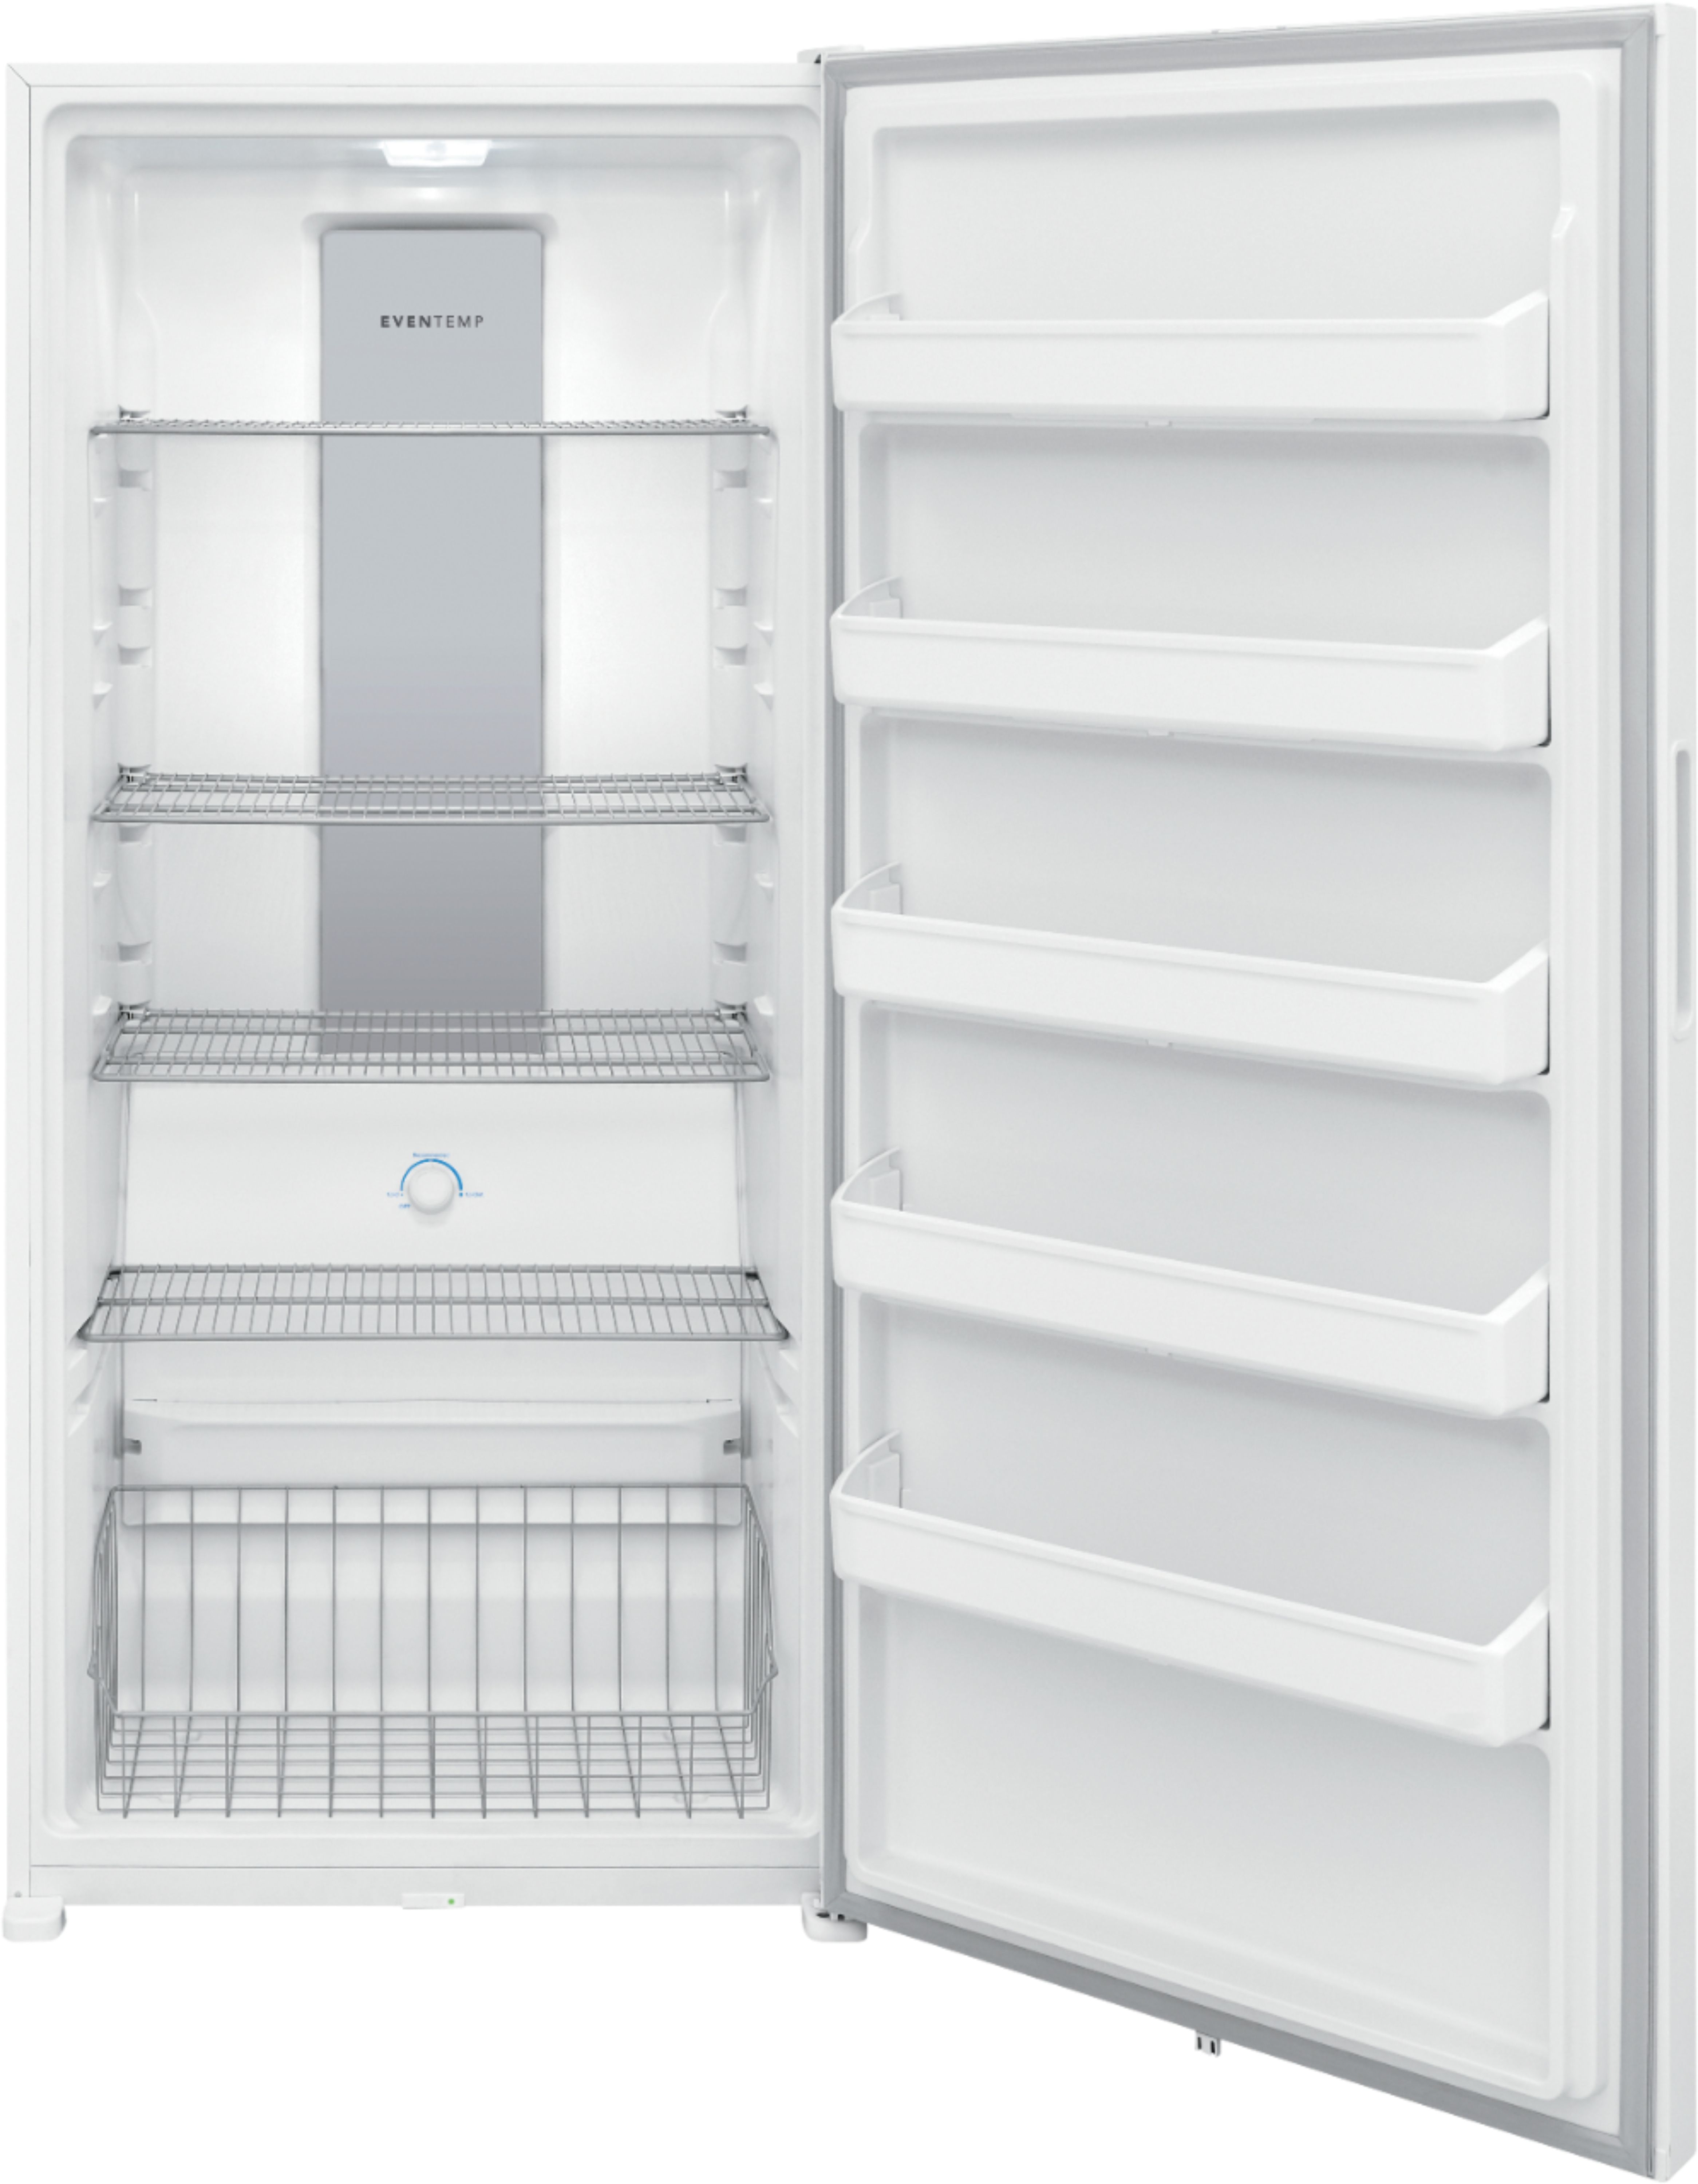 Questions and Answers: Frigidaire 20.0 Cu. Ft. Upright Freezer with ...